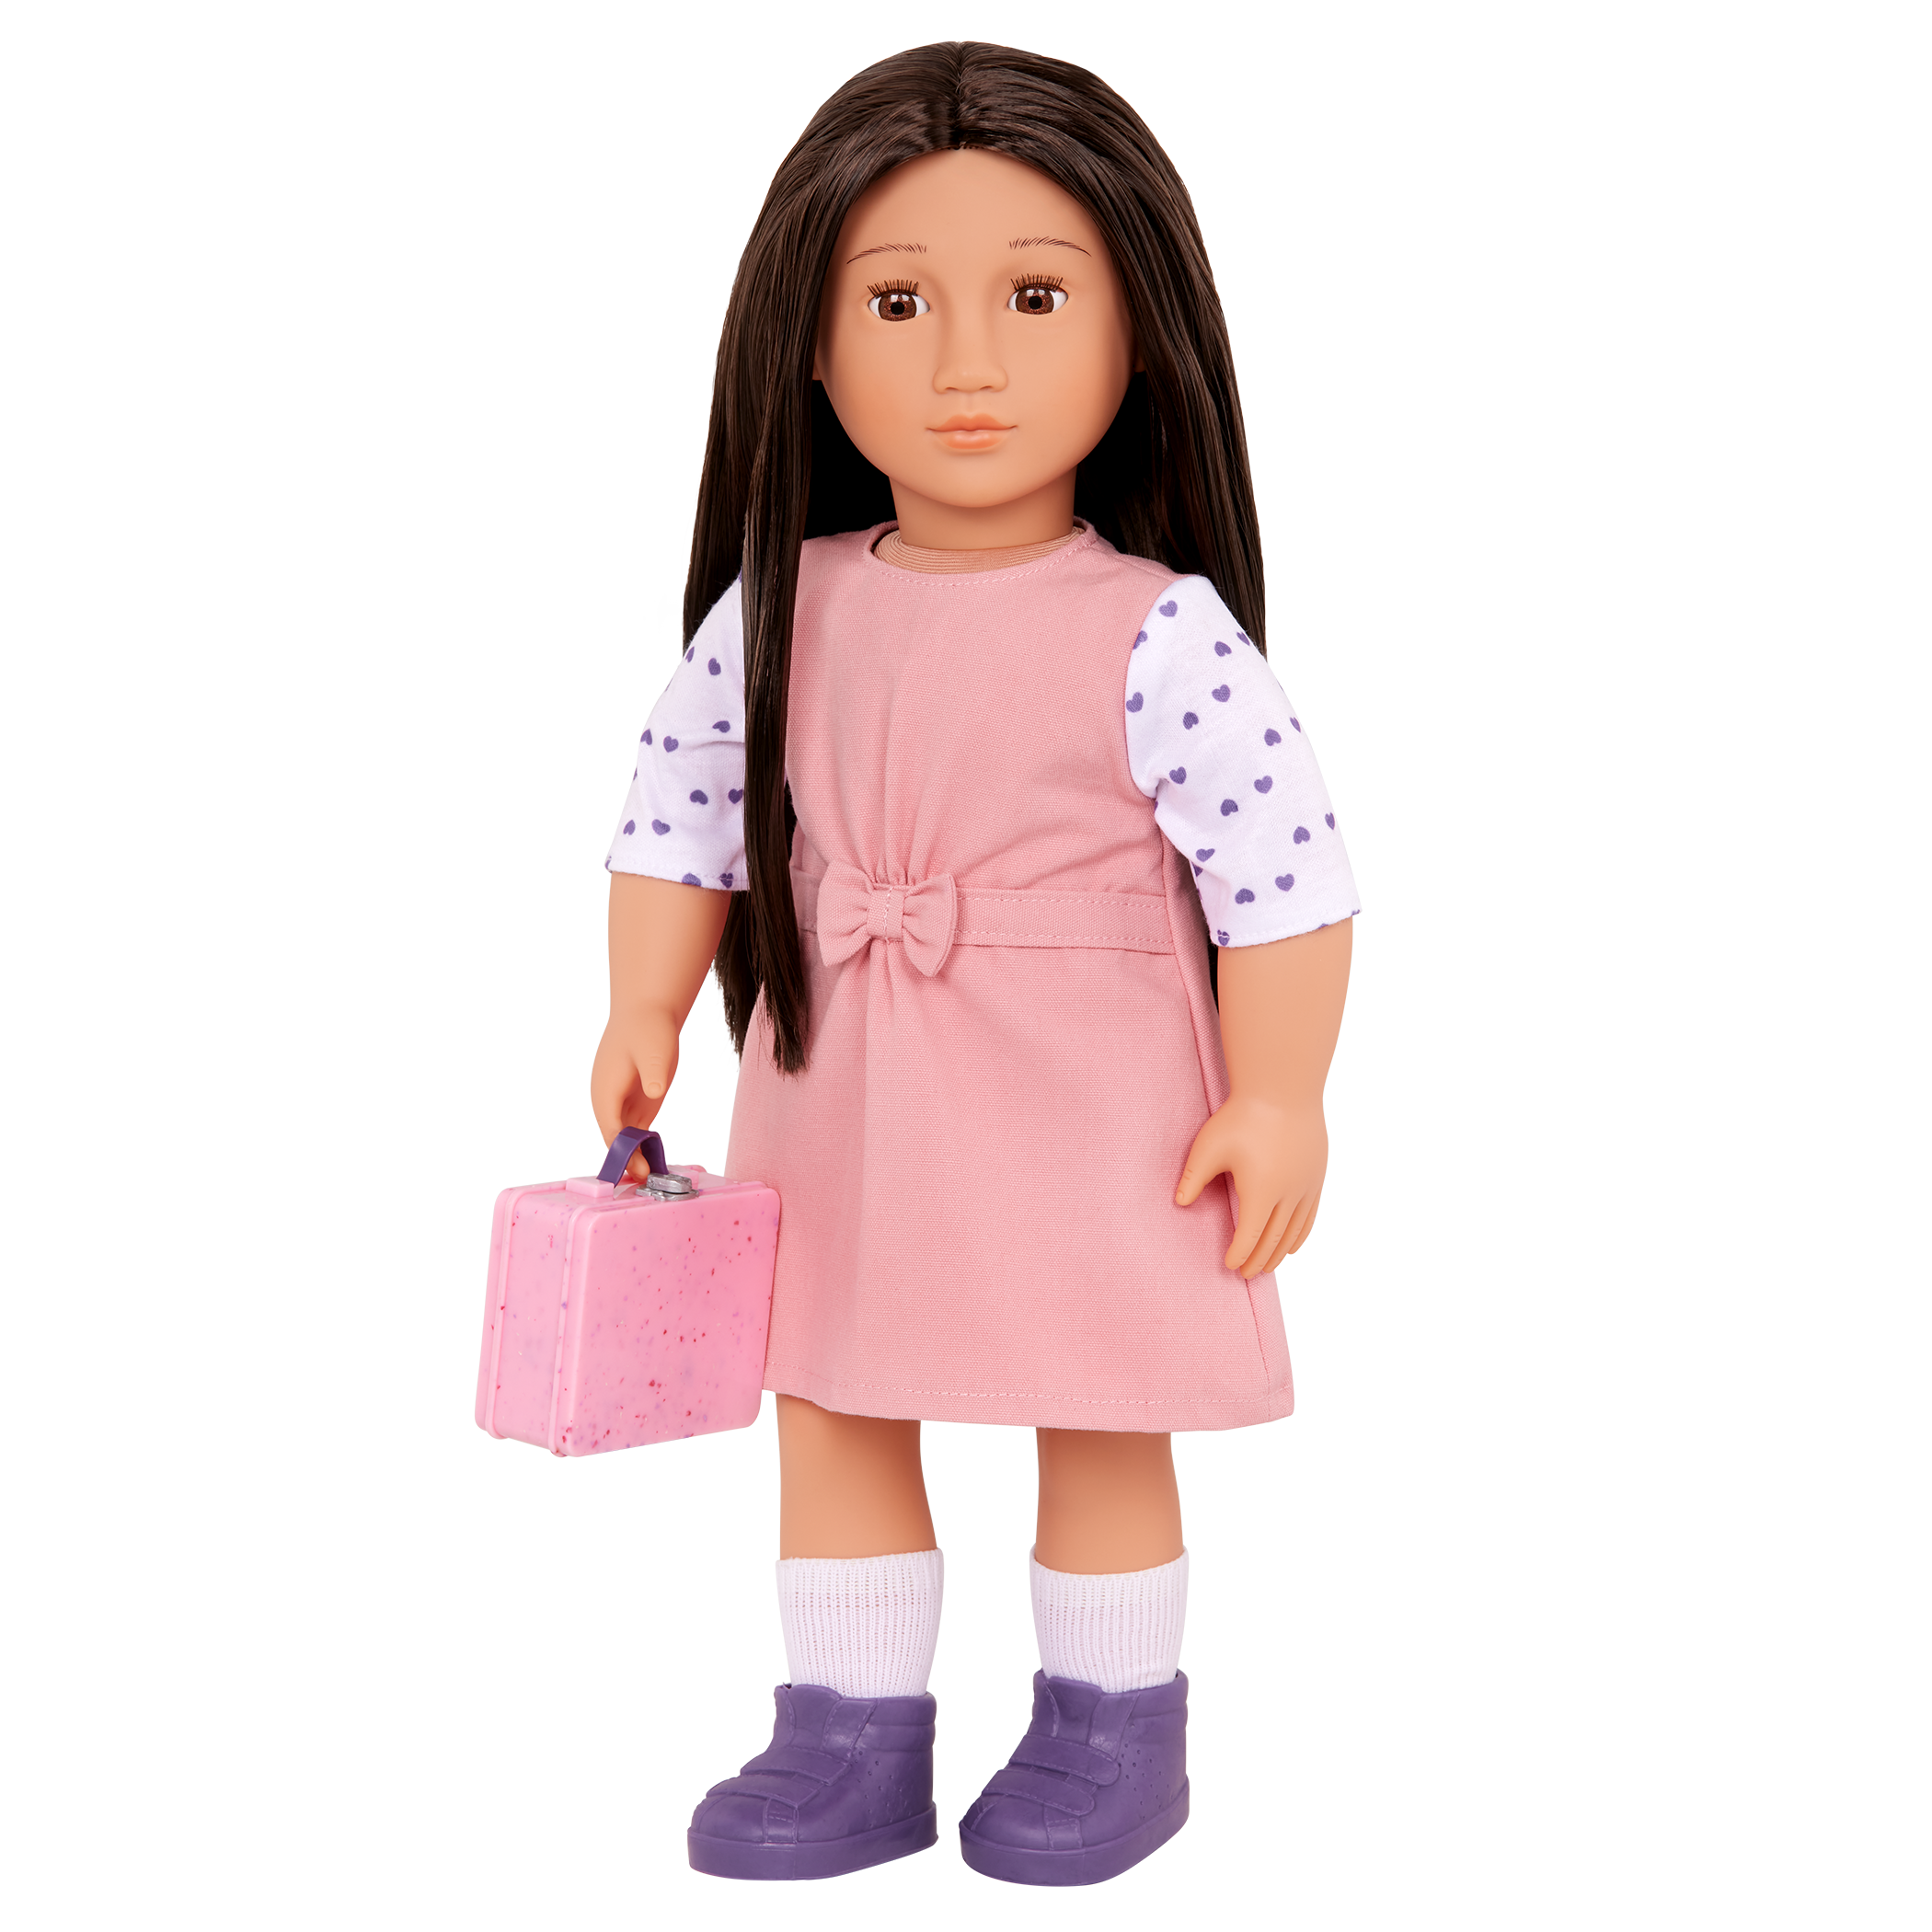 Our Generation 18-inch Doll Lin